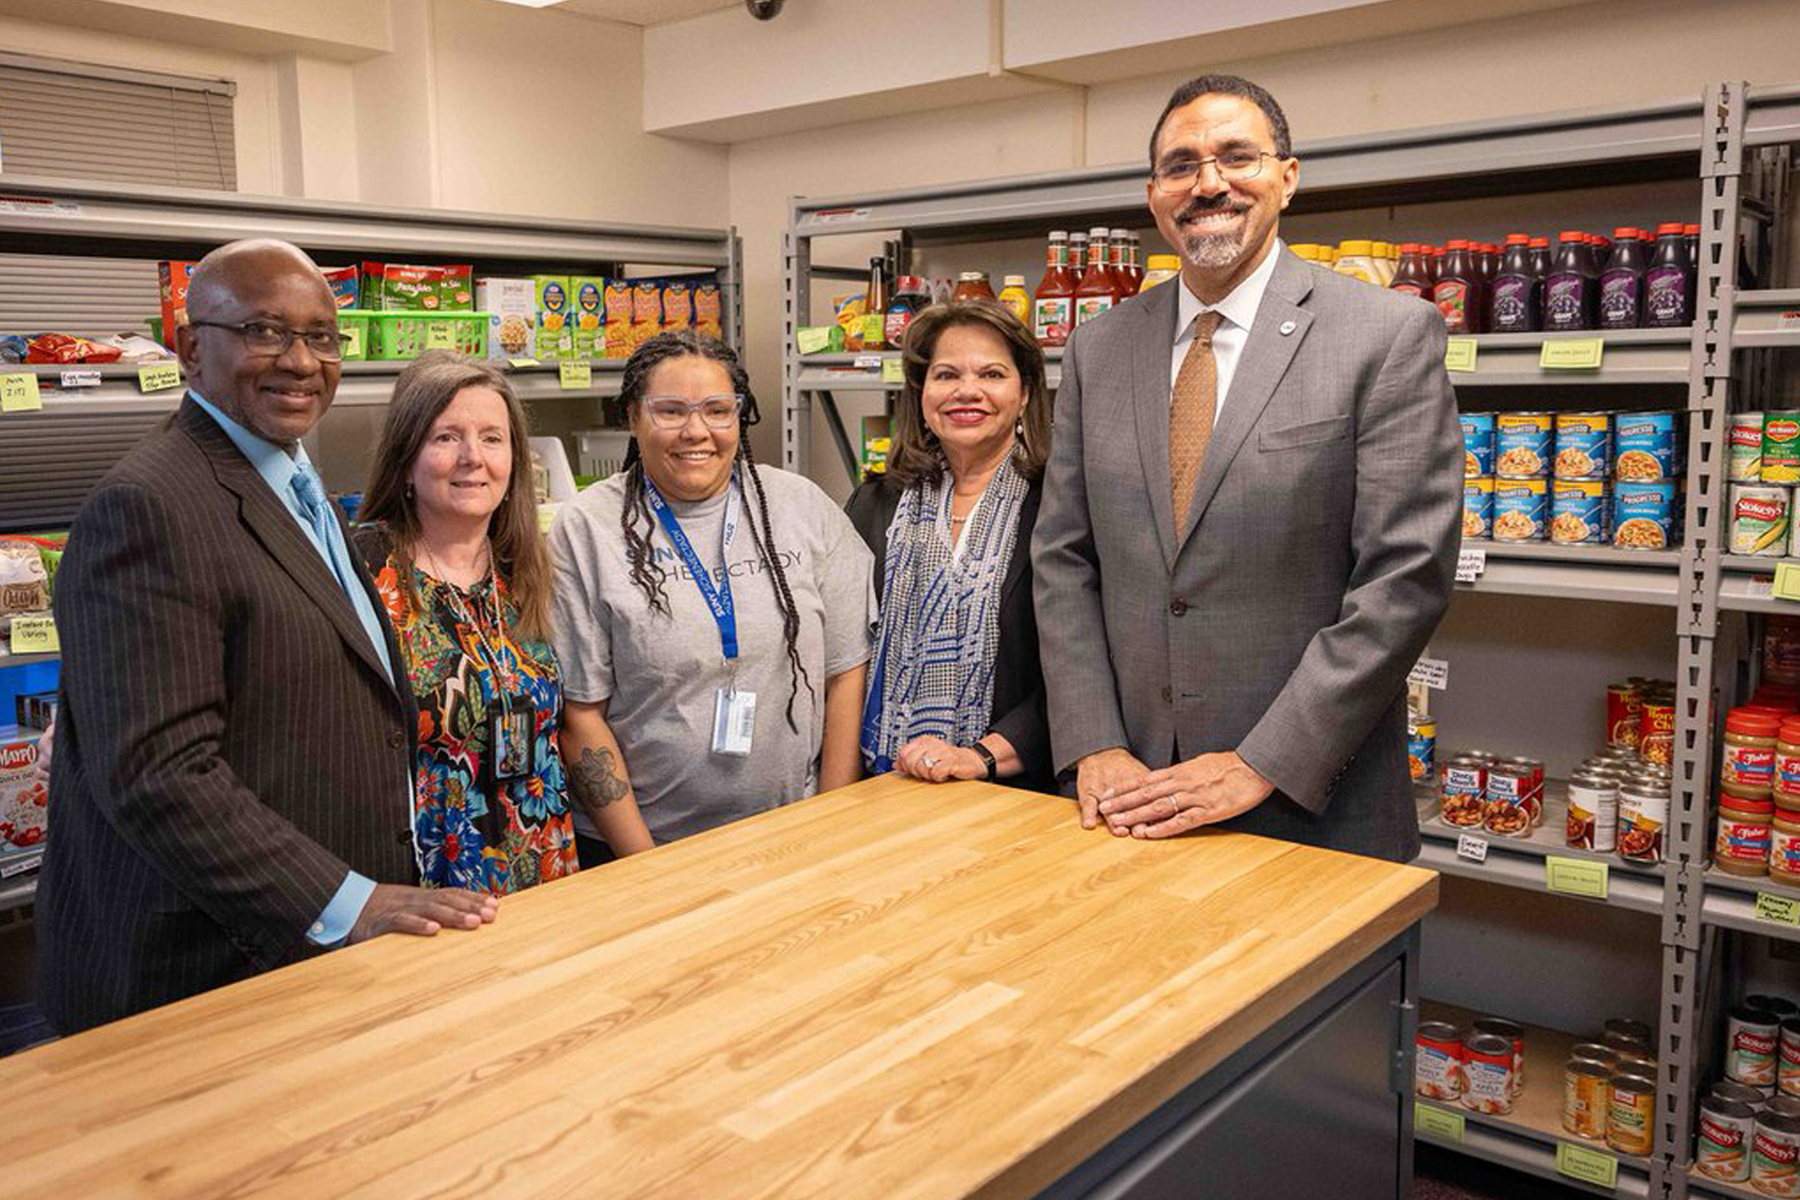 Chancellor King in Food Pantry